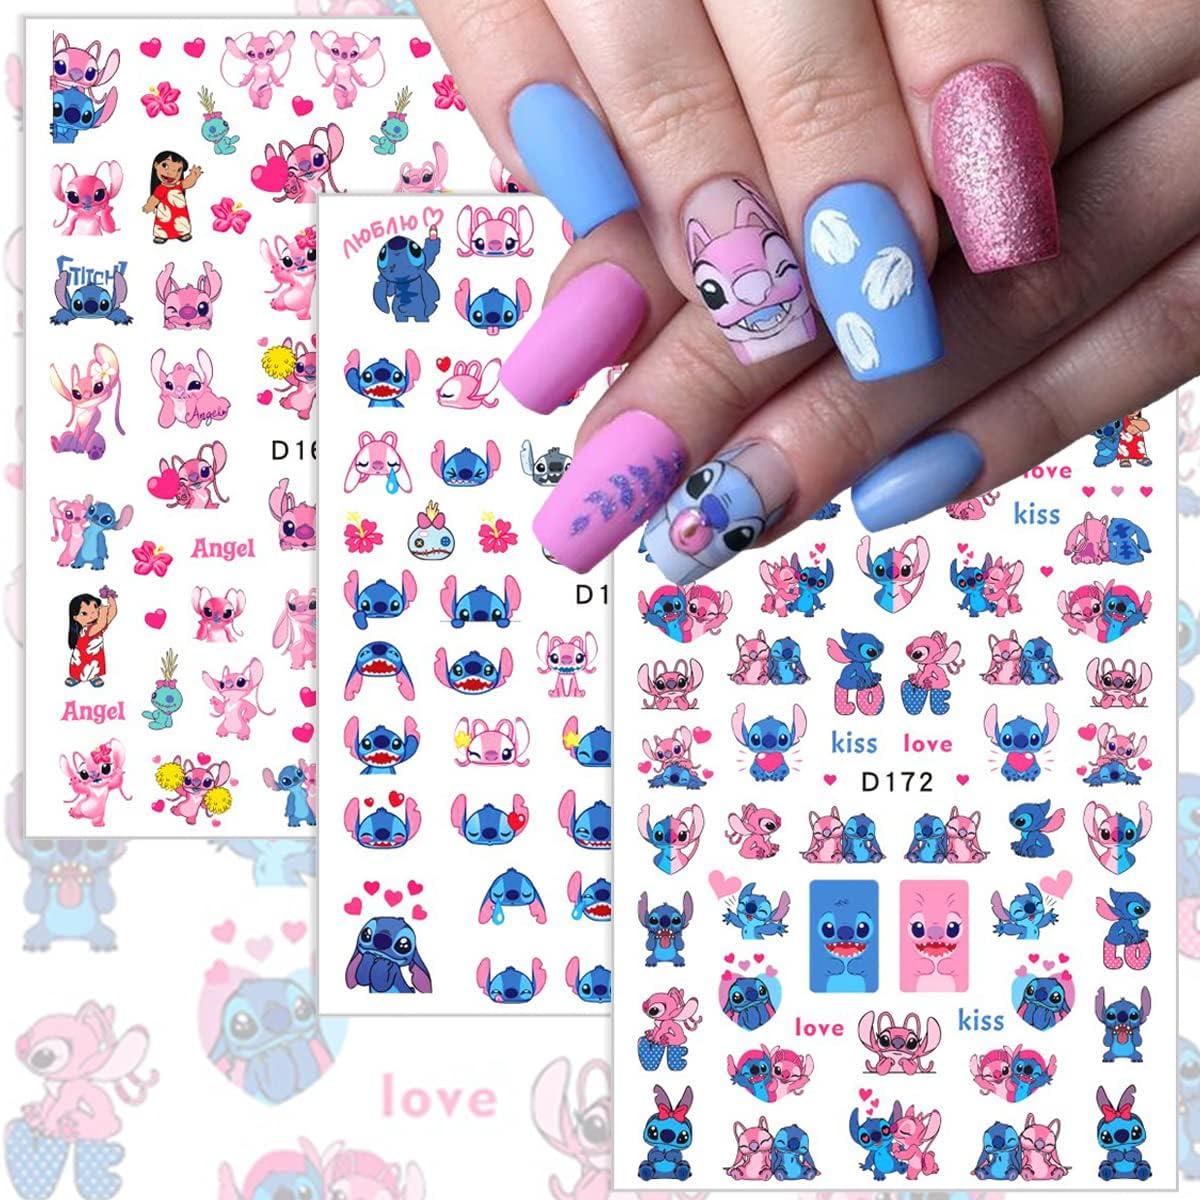 Updated] How to charge and make a profit from your nail art services